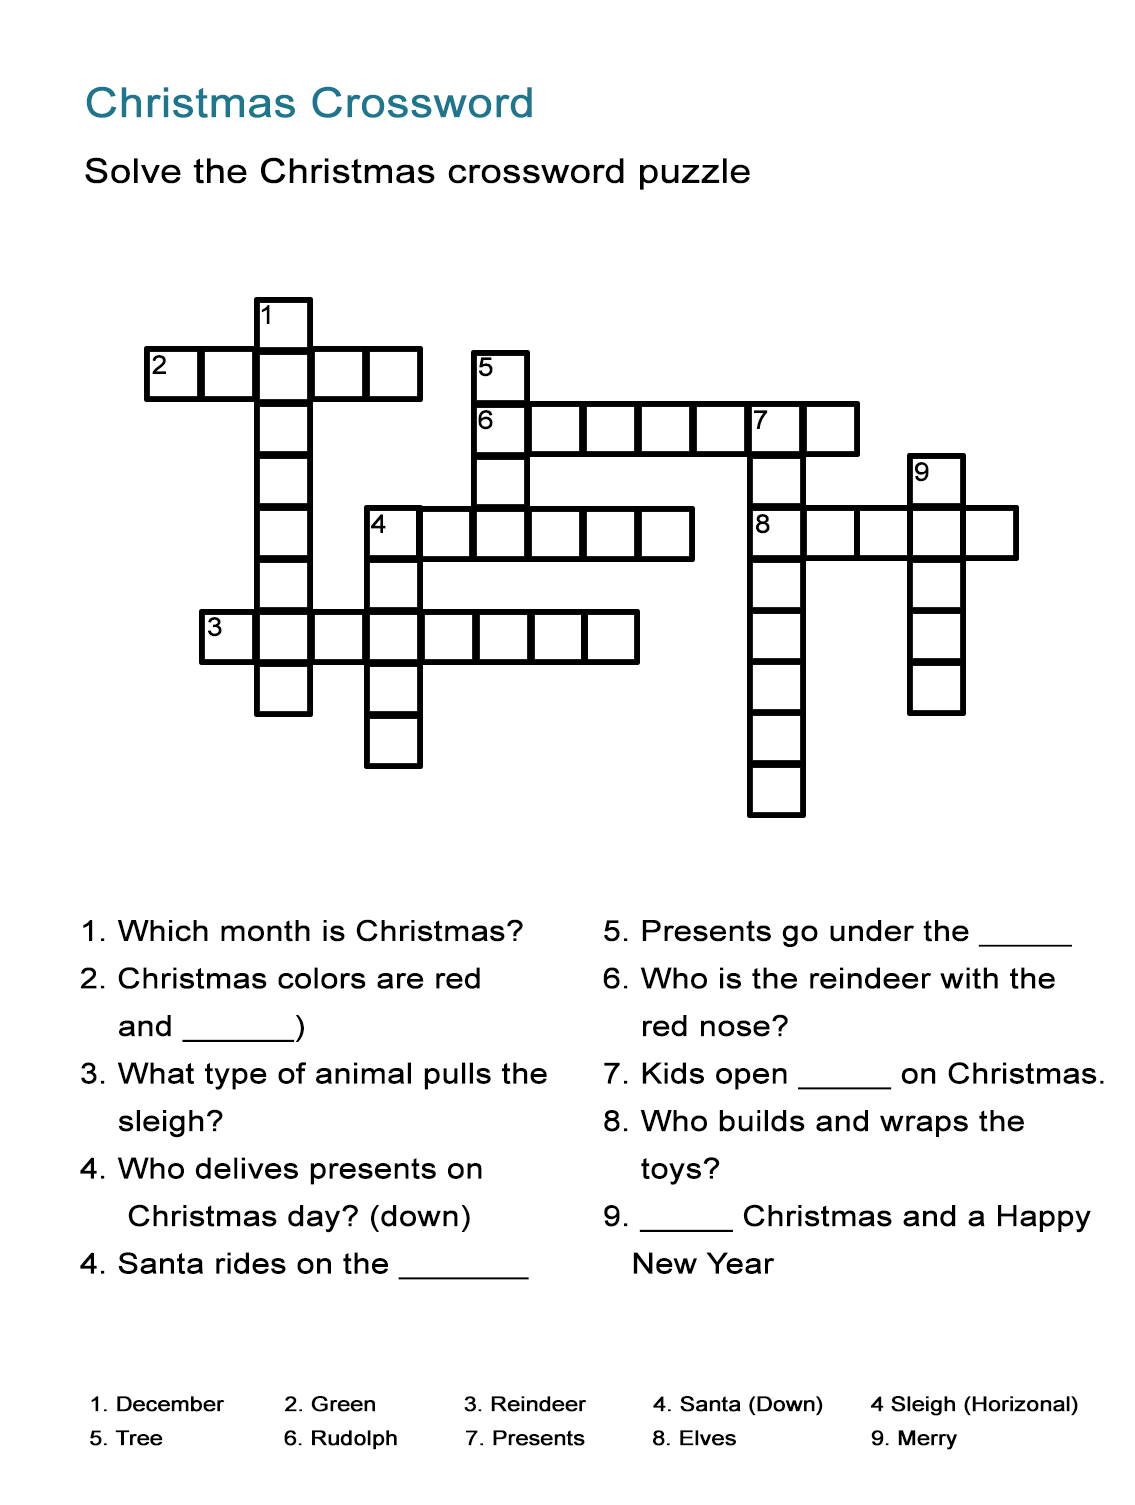 Christmas Crossword Puzzles - Best Coloring Pages For Kids - Printable Crossword Puzzles Nov 2018